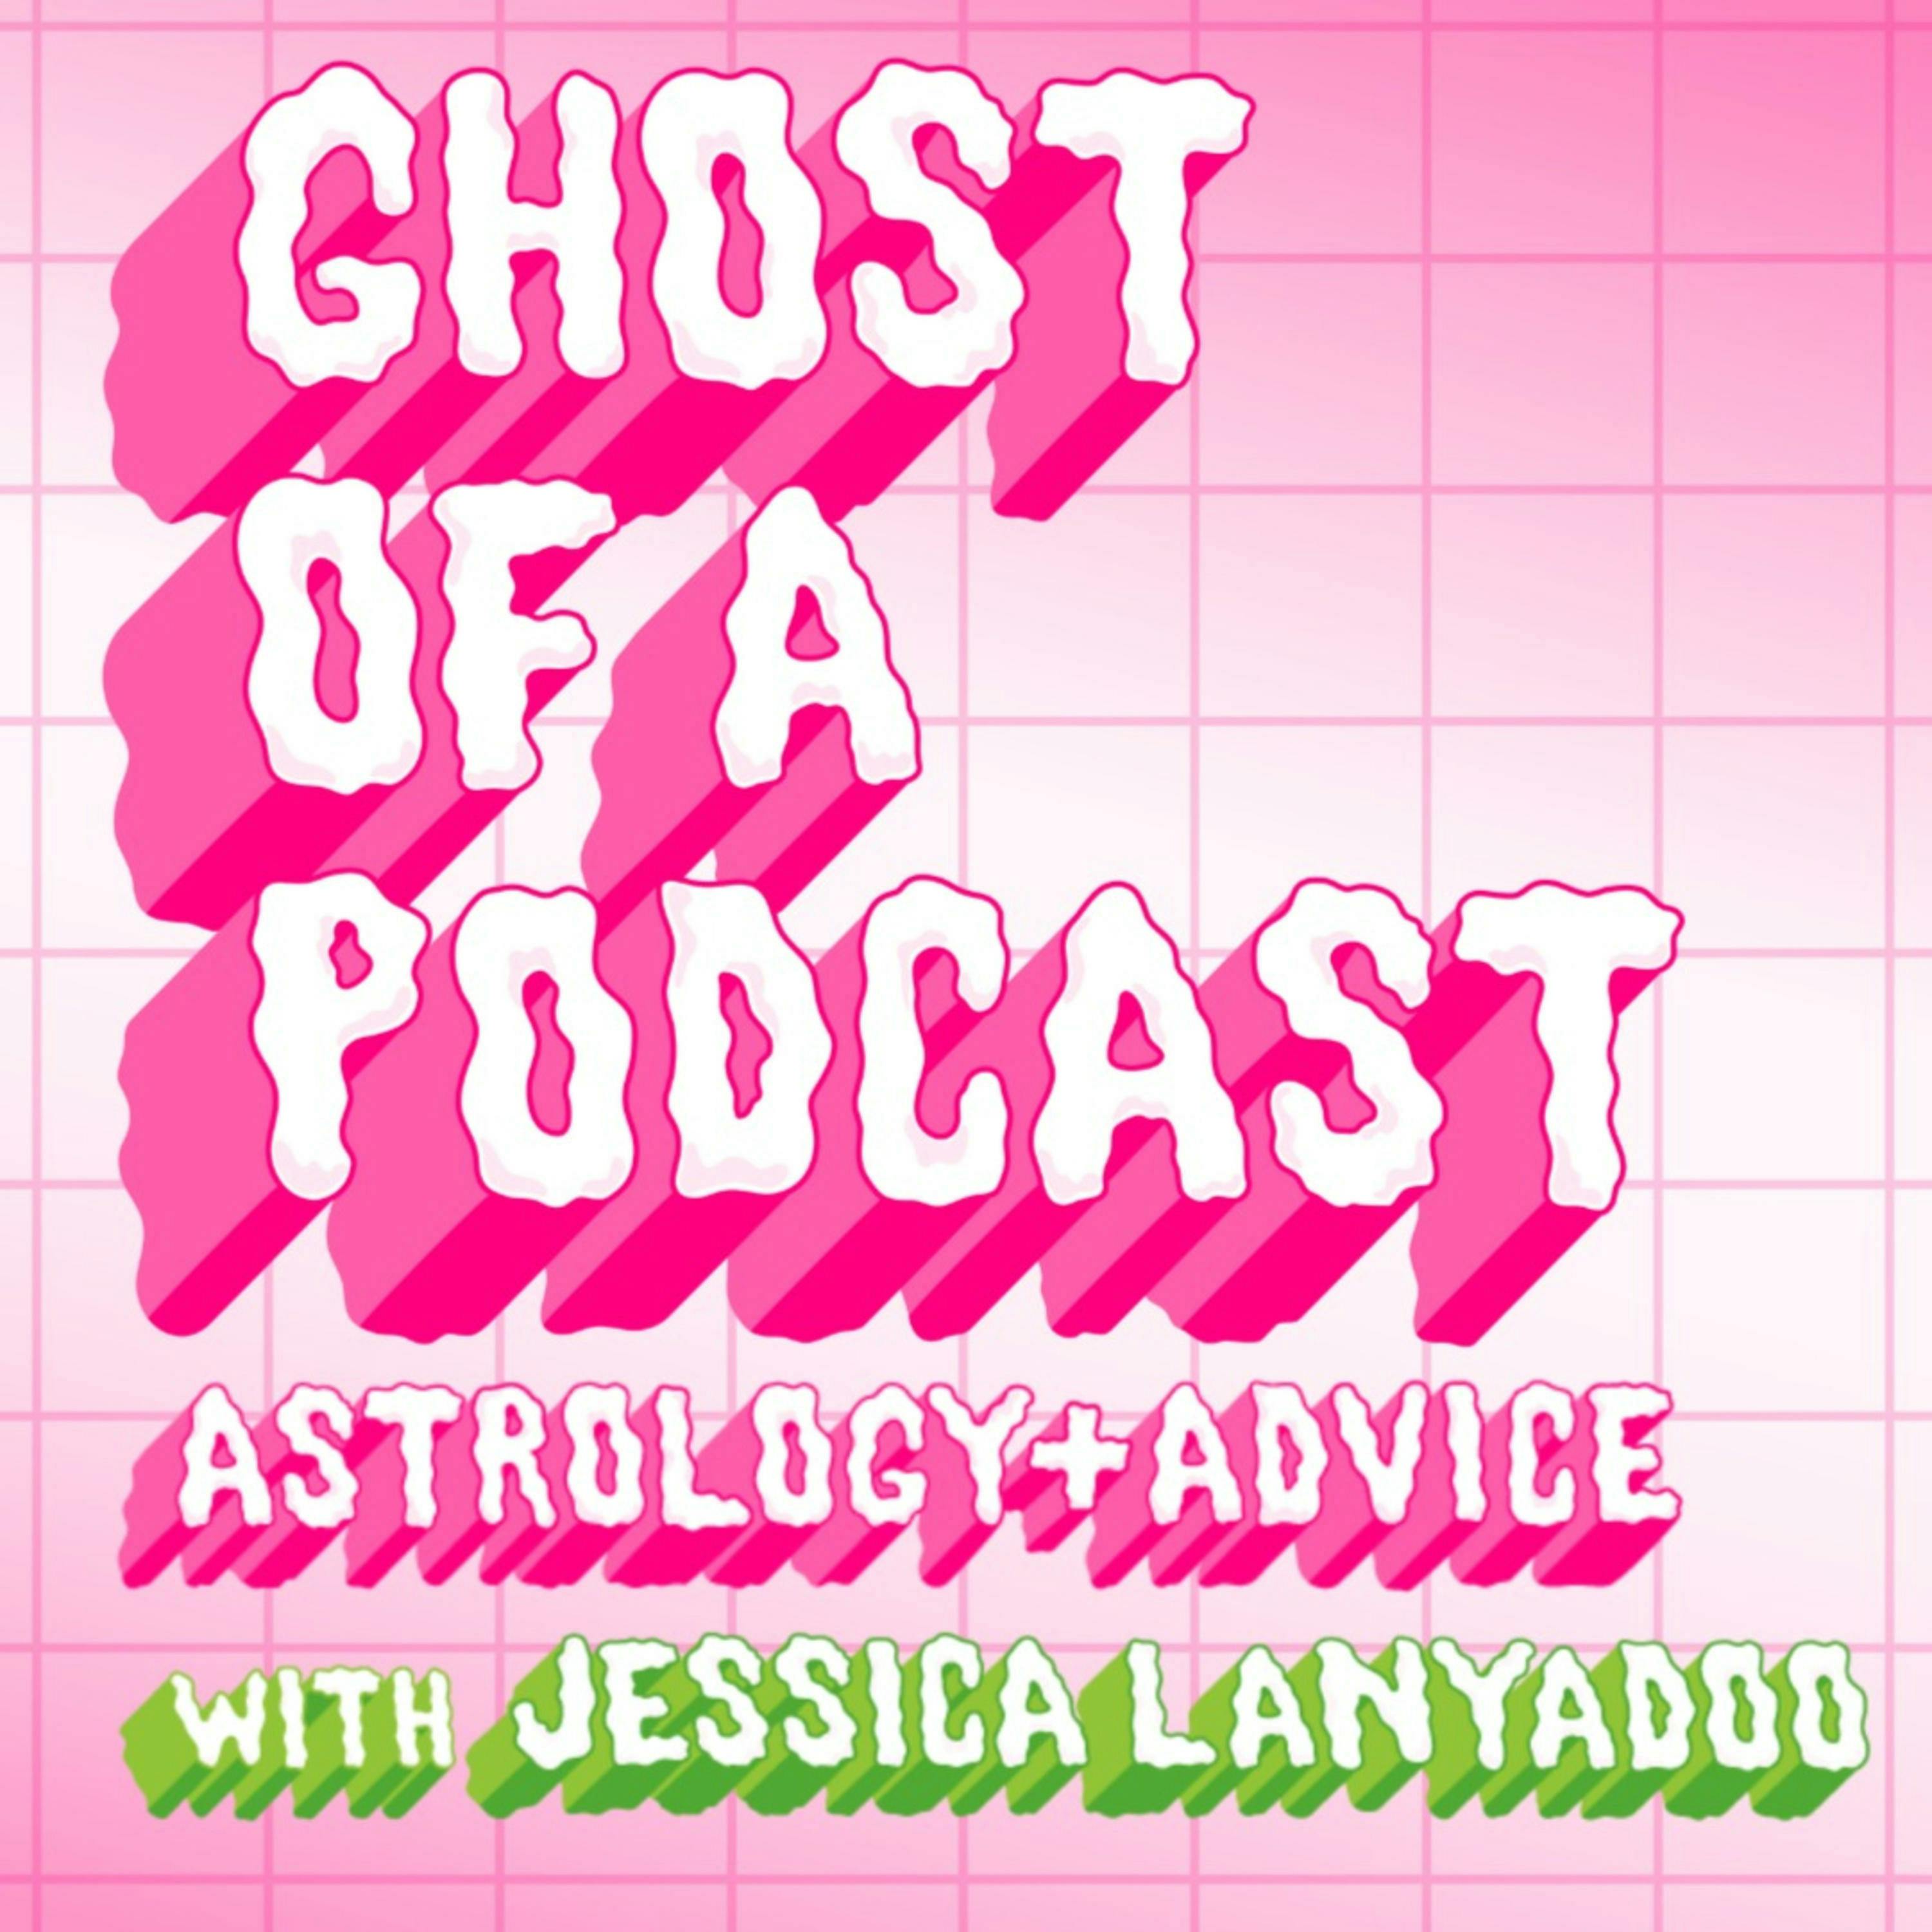 31: When Being a Good Person Feels Like Too Much + Astrology